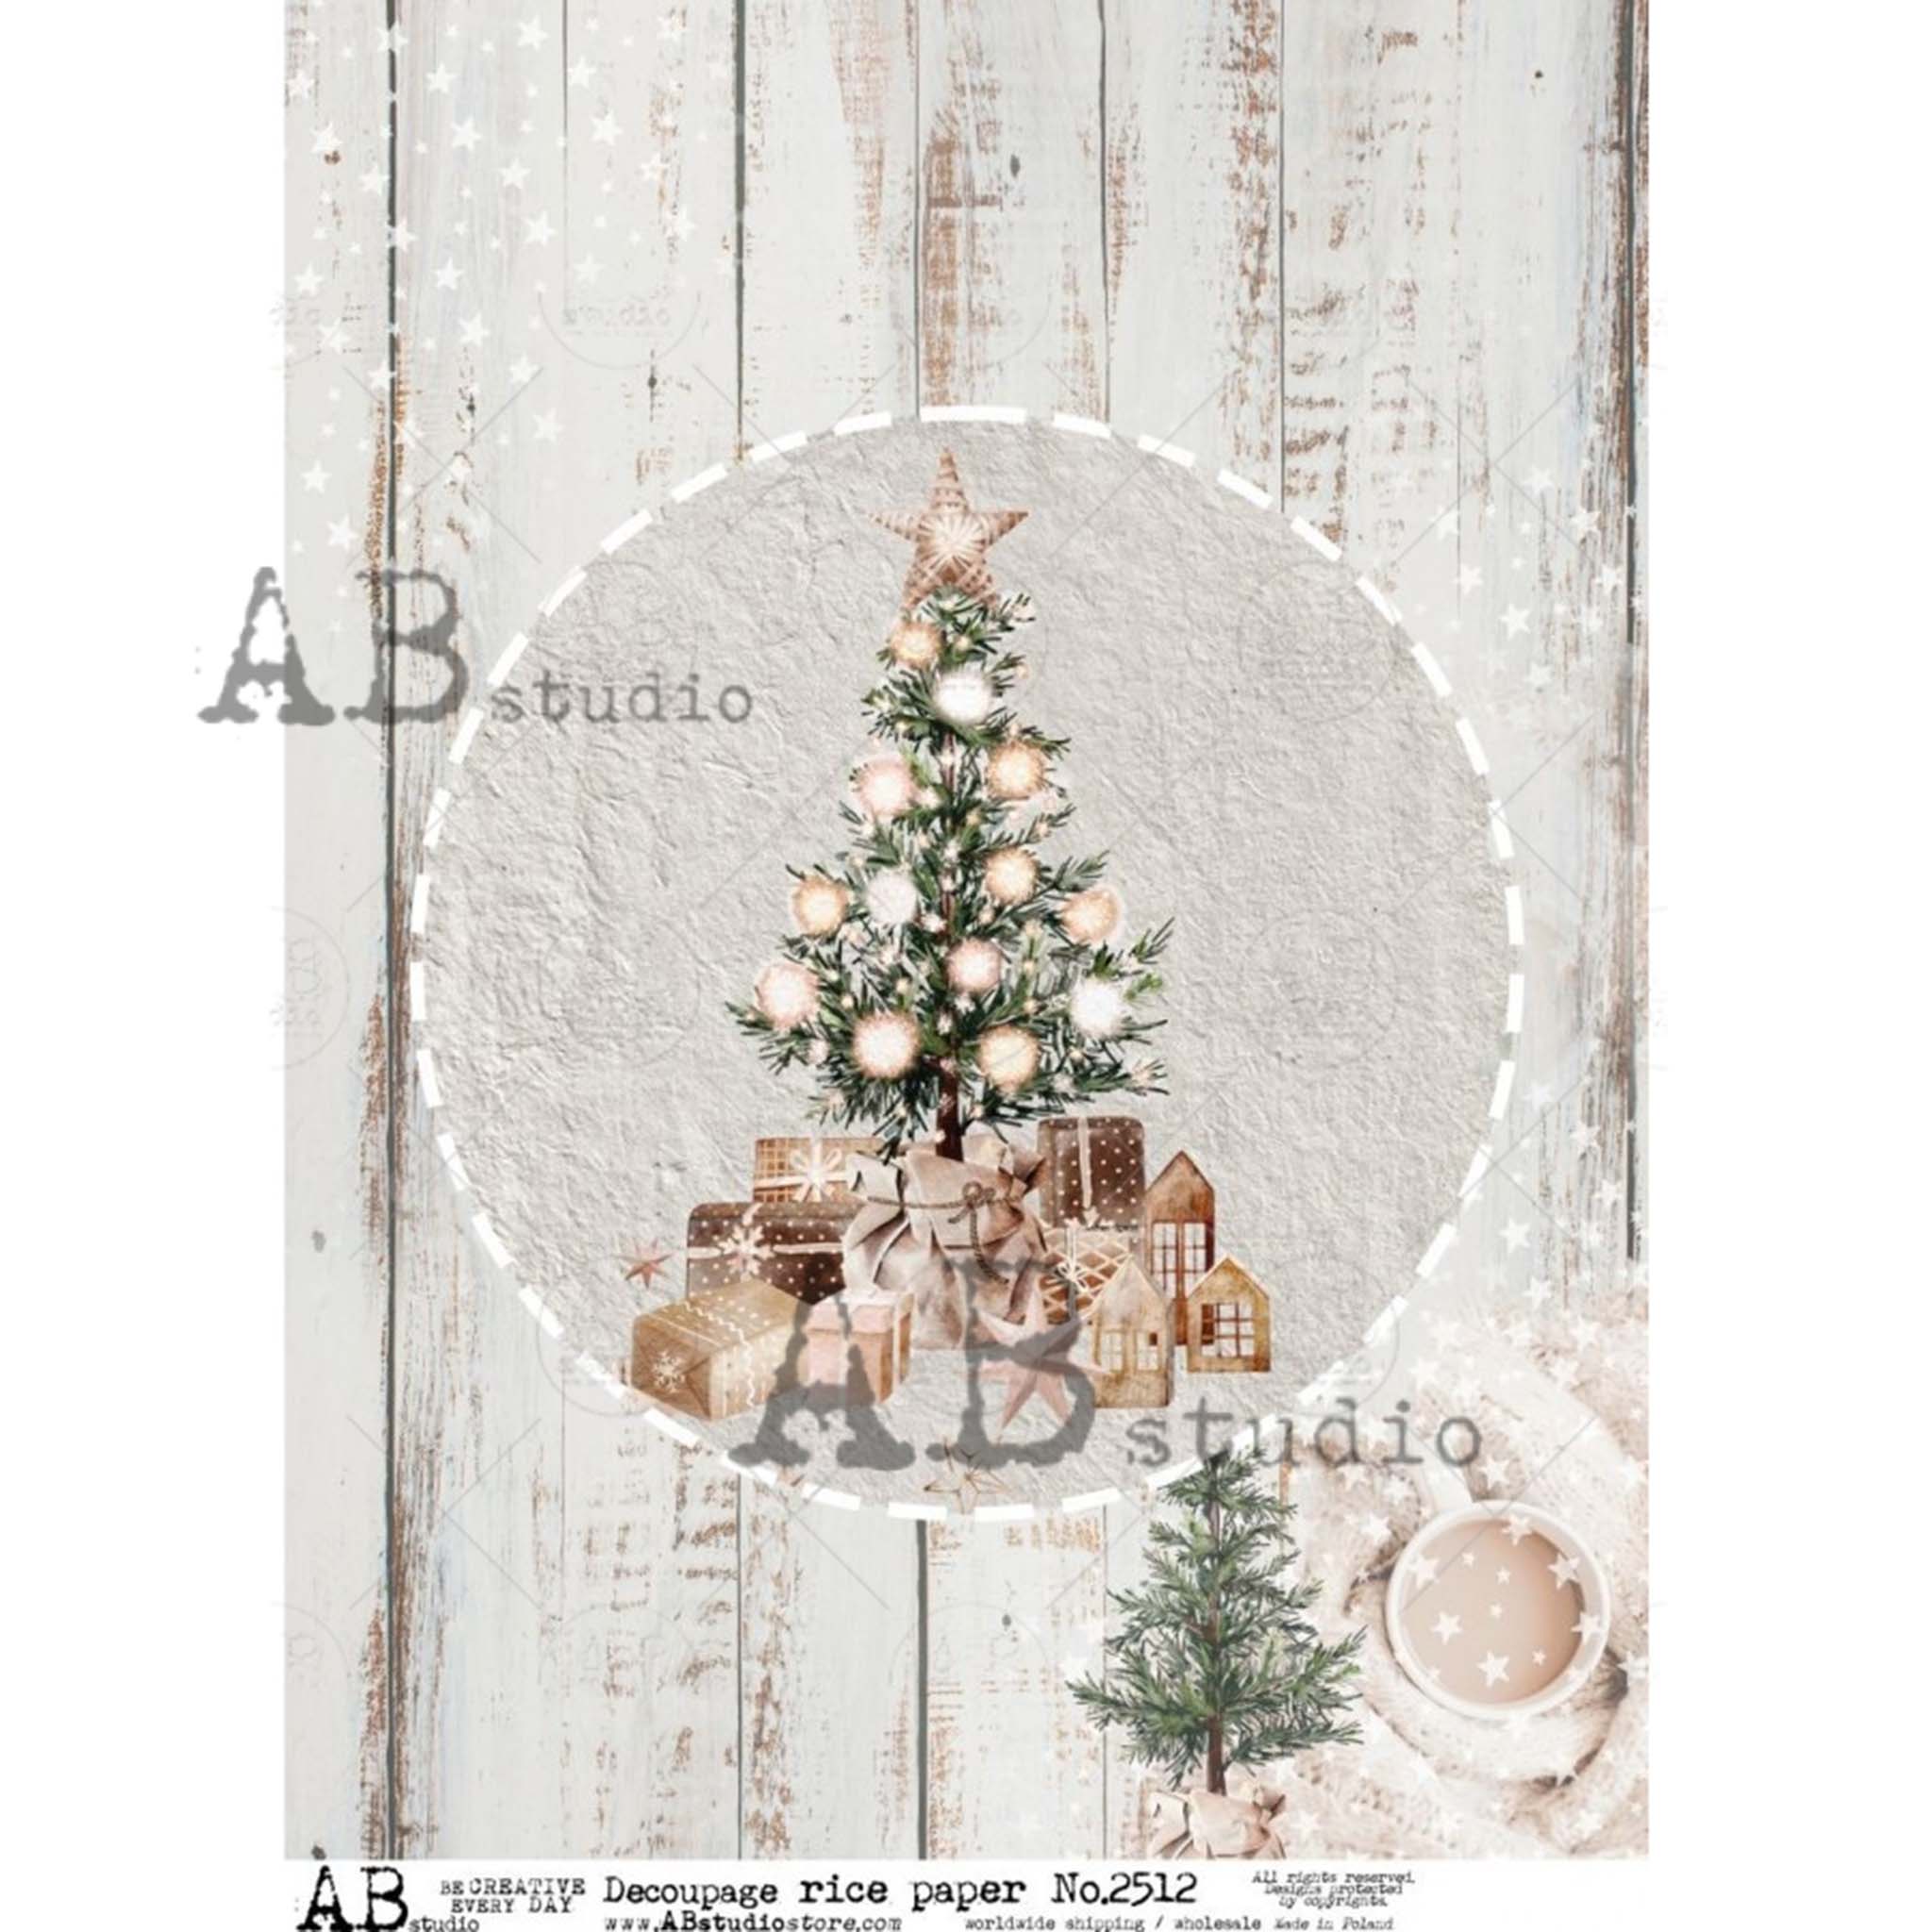 A4 rice paper design that features a shabby chic barn wood background that has a beautiful central Christmas tree design with gifts underneath.